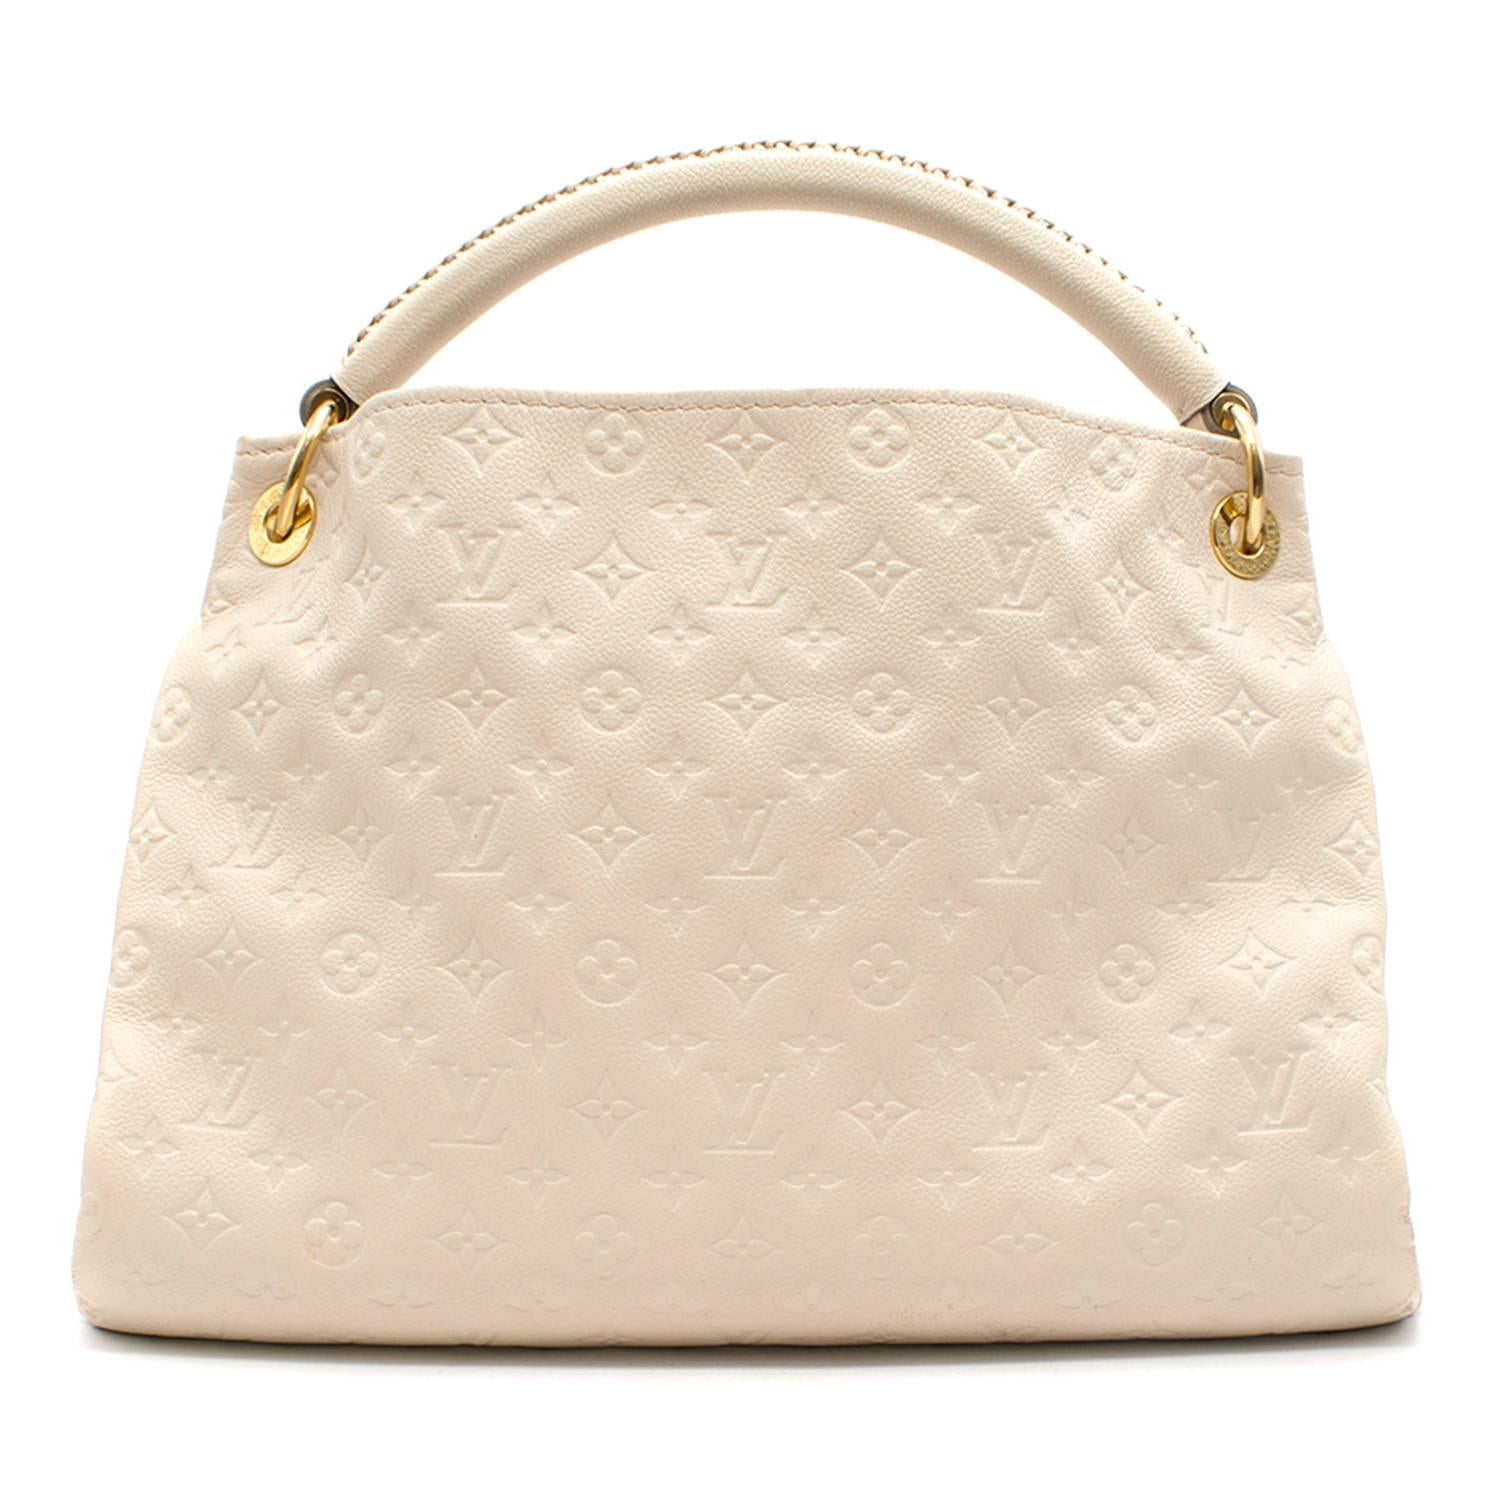 Louis Vuitton off- white monogram leather hobo bag. 

Features signature Louis Vuitton monogram pattern embossed on surface of bag. 
Features one interior zipped pocket and six interior pouches. 

Fabric: Leather/Gold- toned hardware. 

Condition: